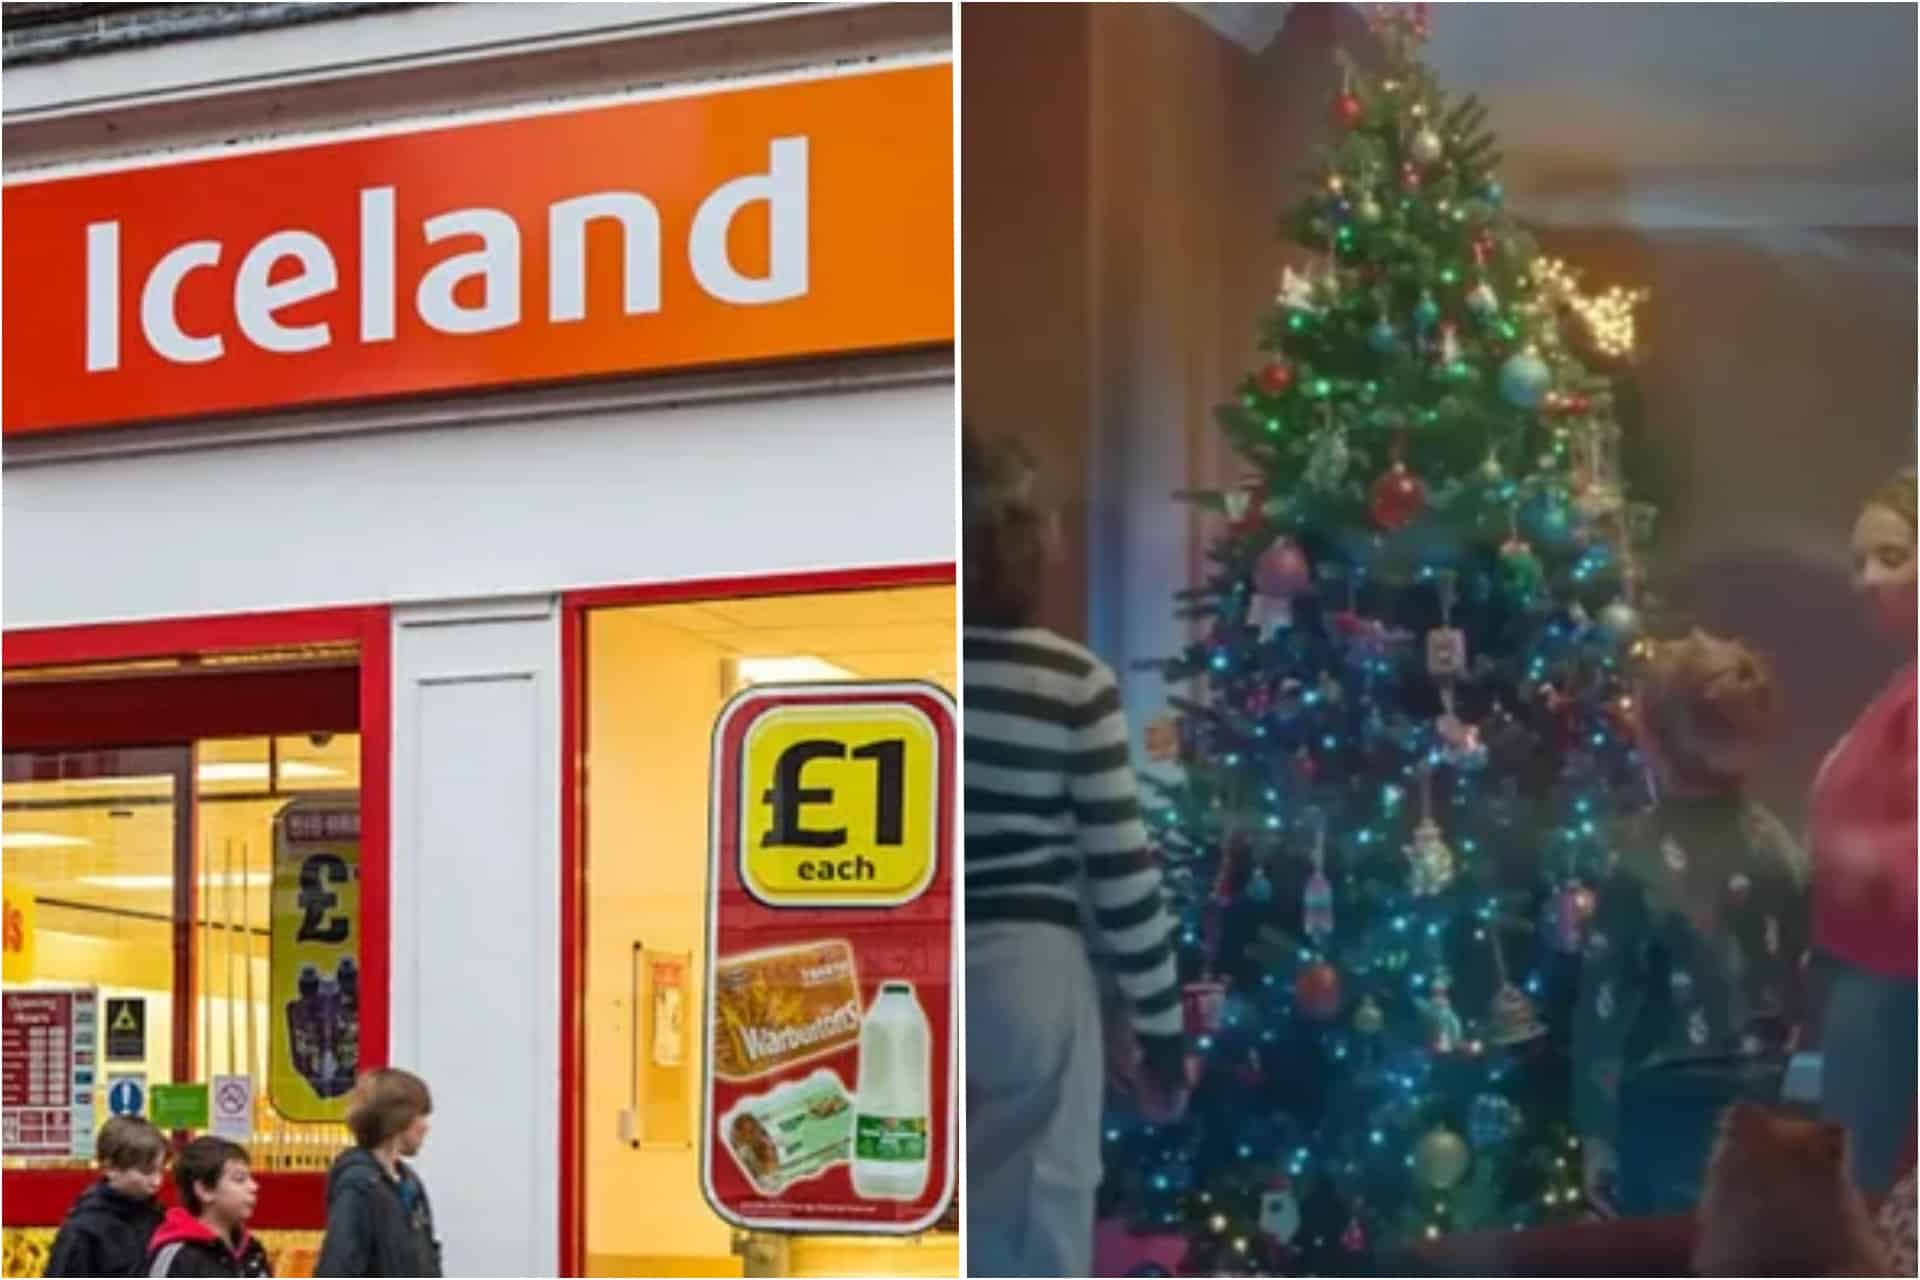 Iceland ditches Christmas advert to use money to support customers in cost of living crisis